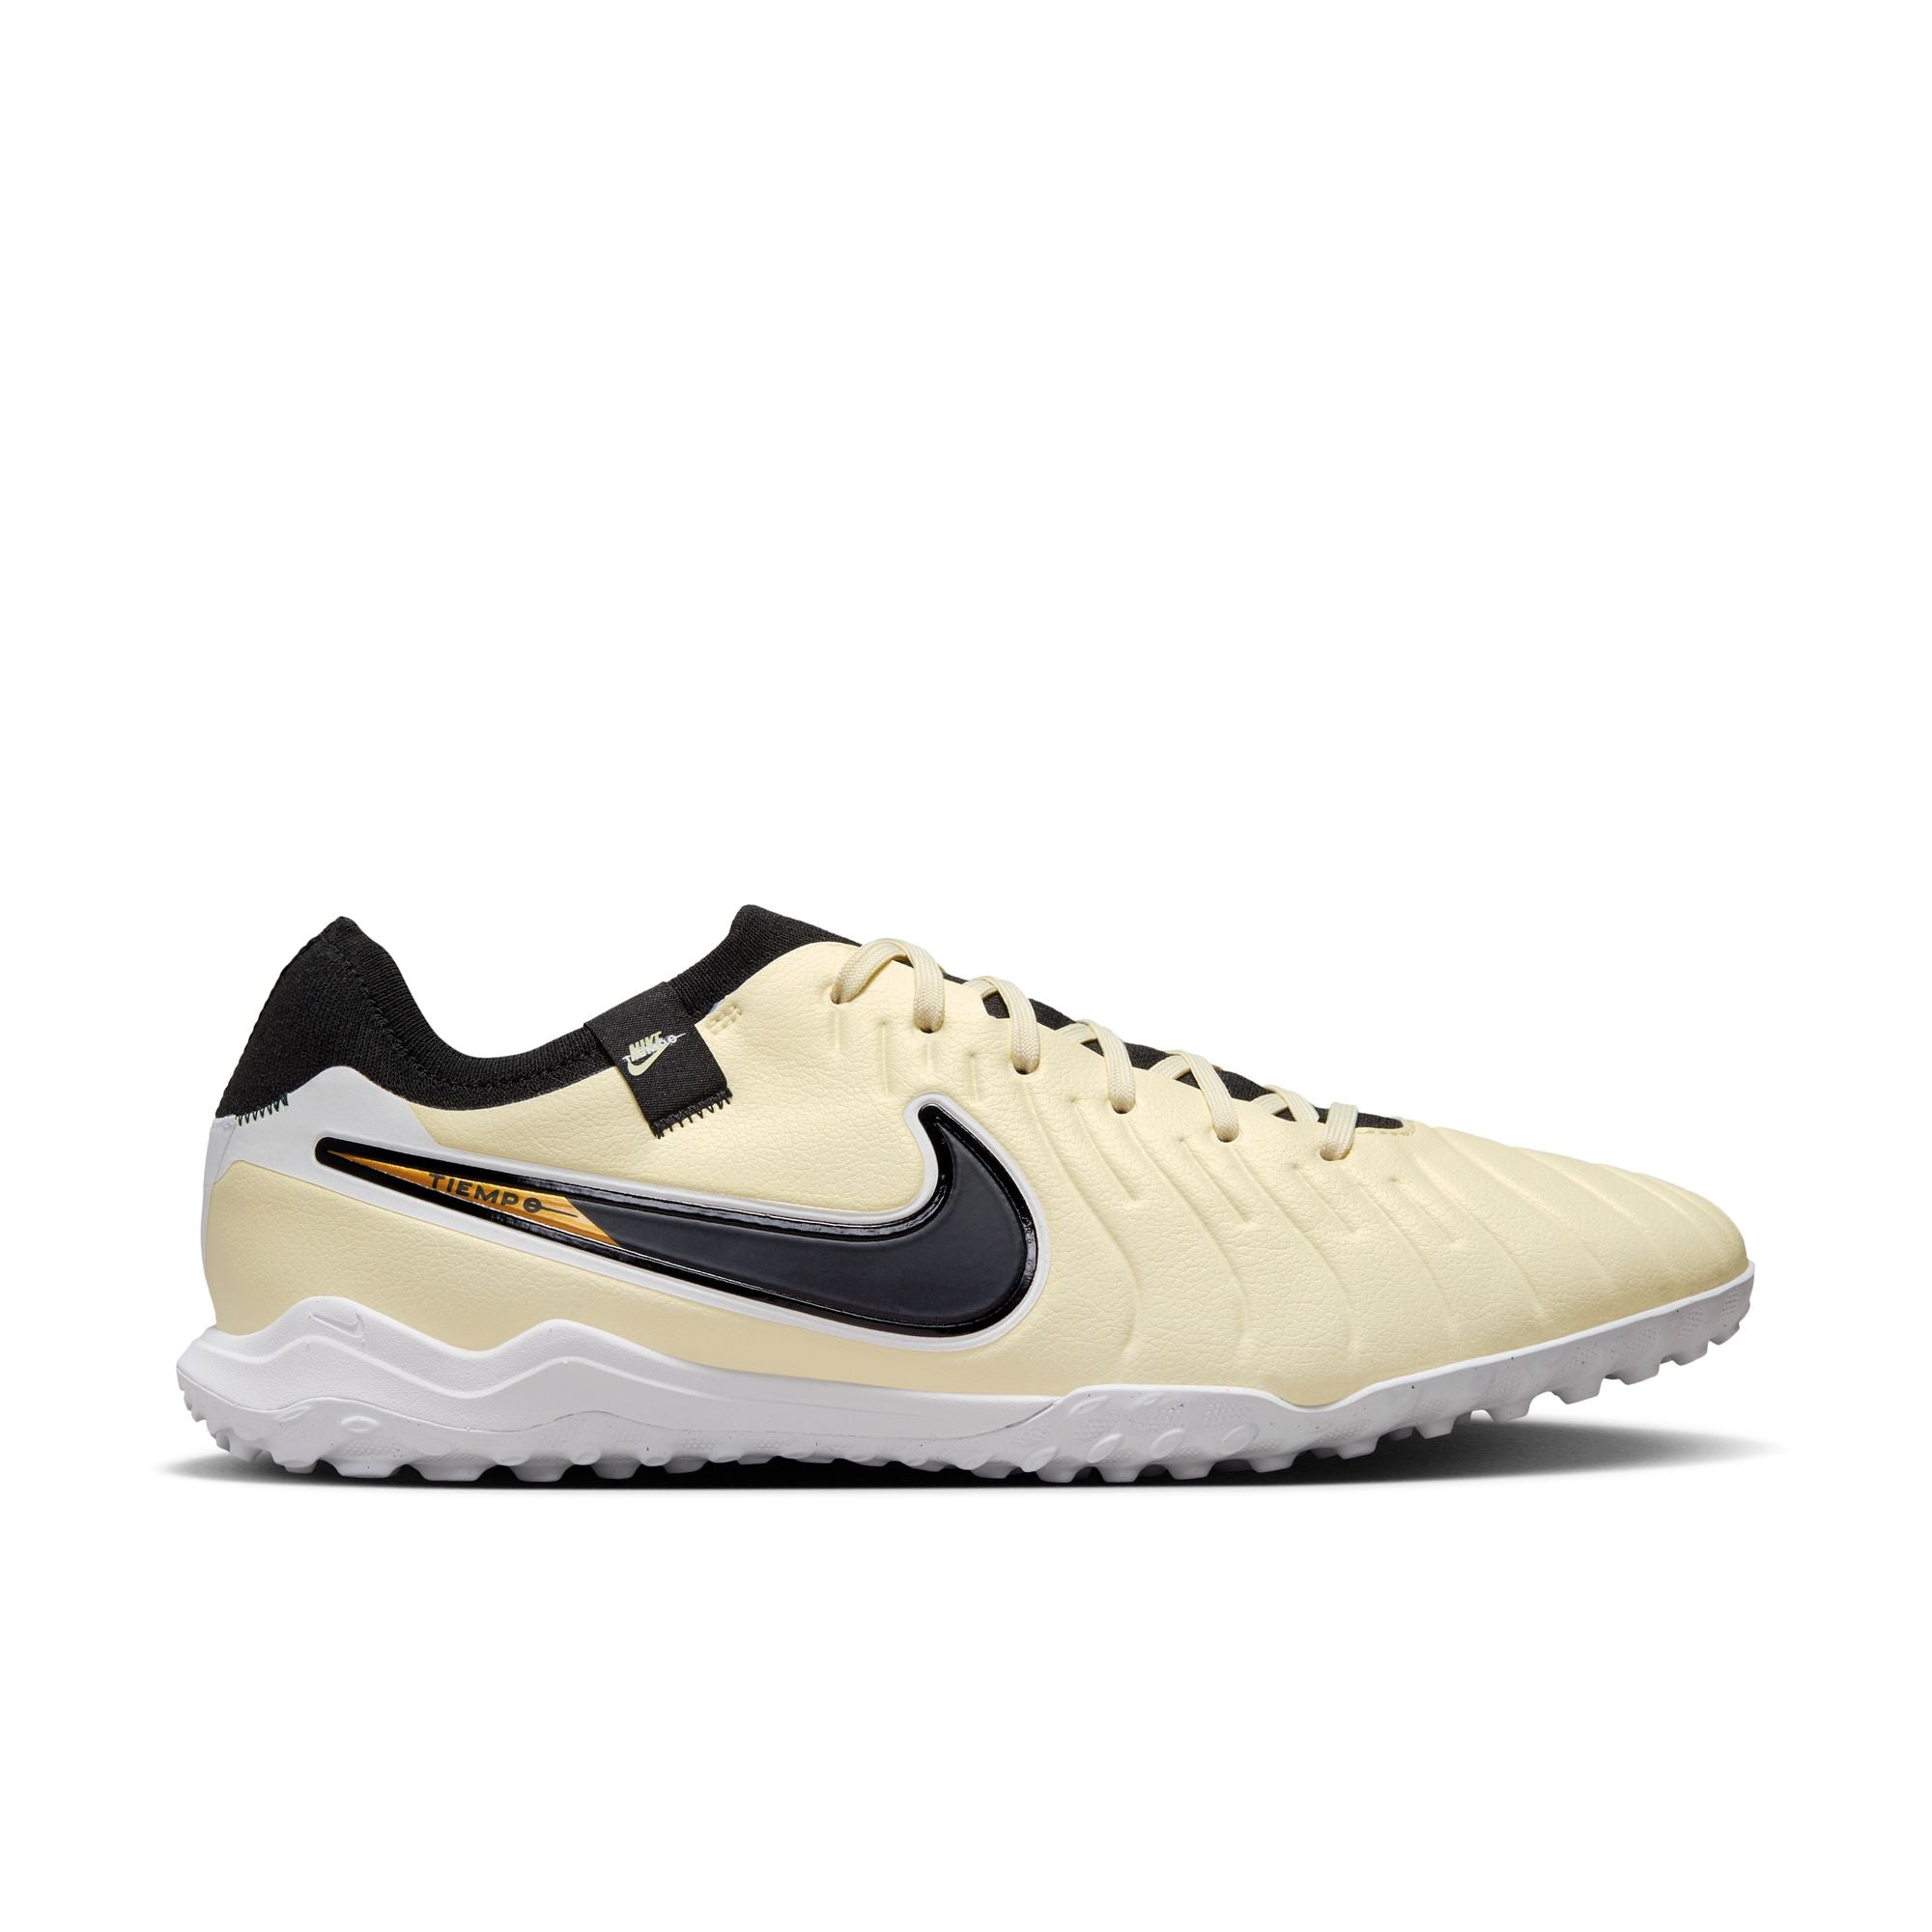 Nike Tiempo Legend 10 Pro Turf Low-Top Soccer Shoes